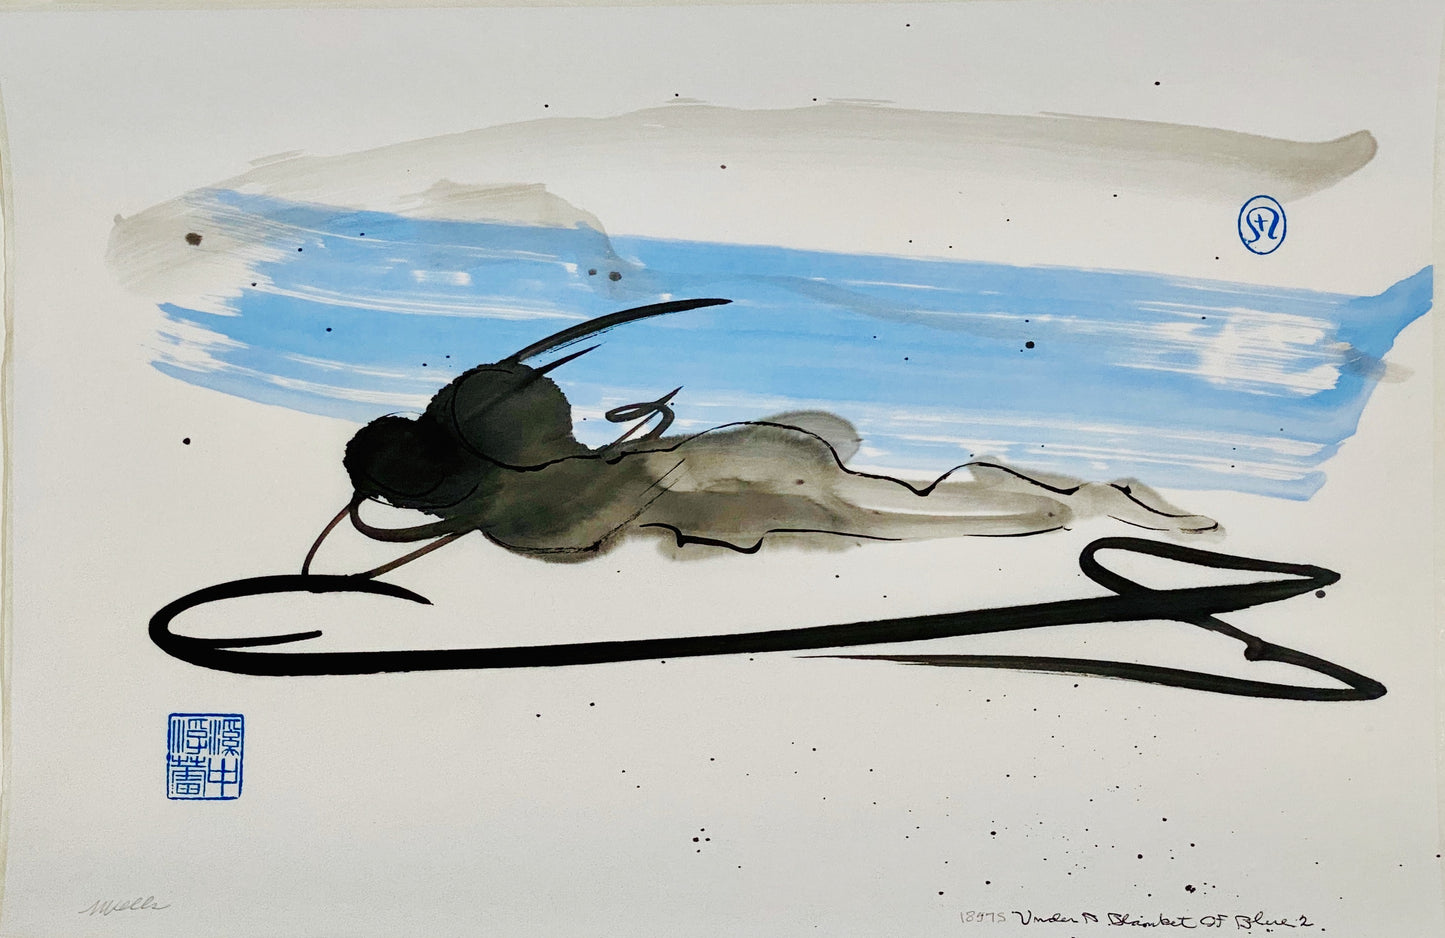 Abstract sumi e Print “Under A Blanket of Blue” by Marilyn Wells